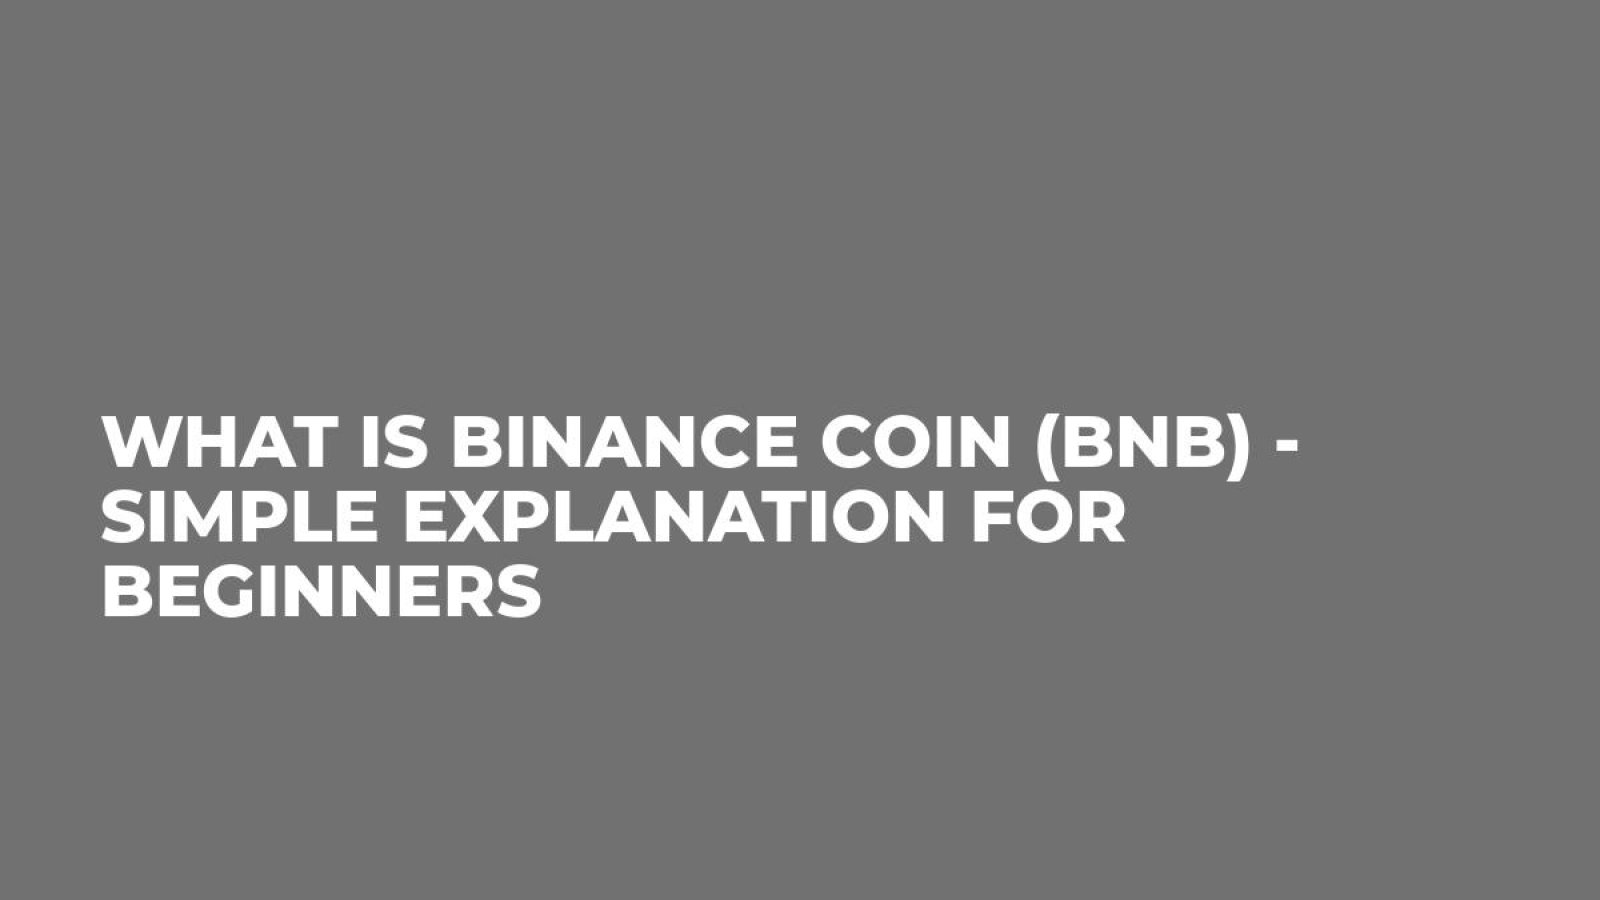 What Is Binance Coin (BNB) - Simple Explanation for Beginners